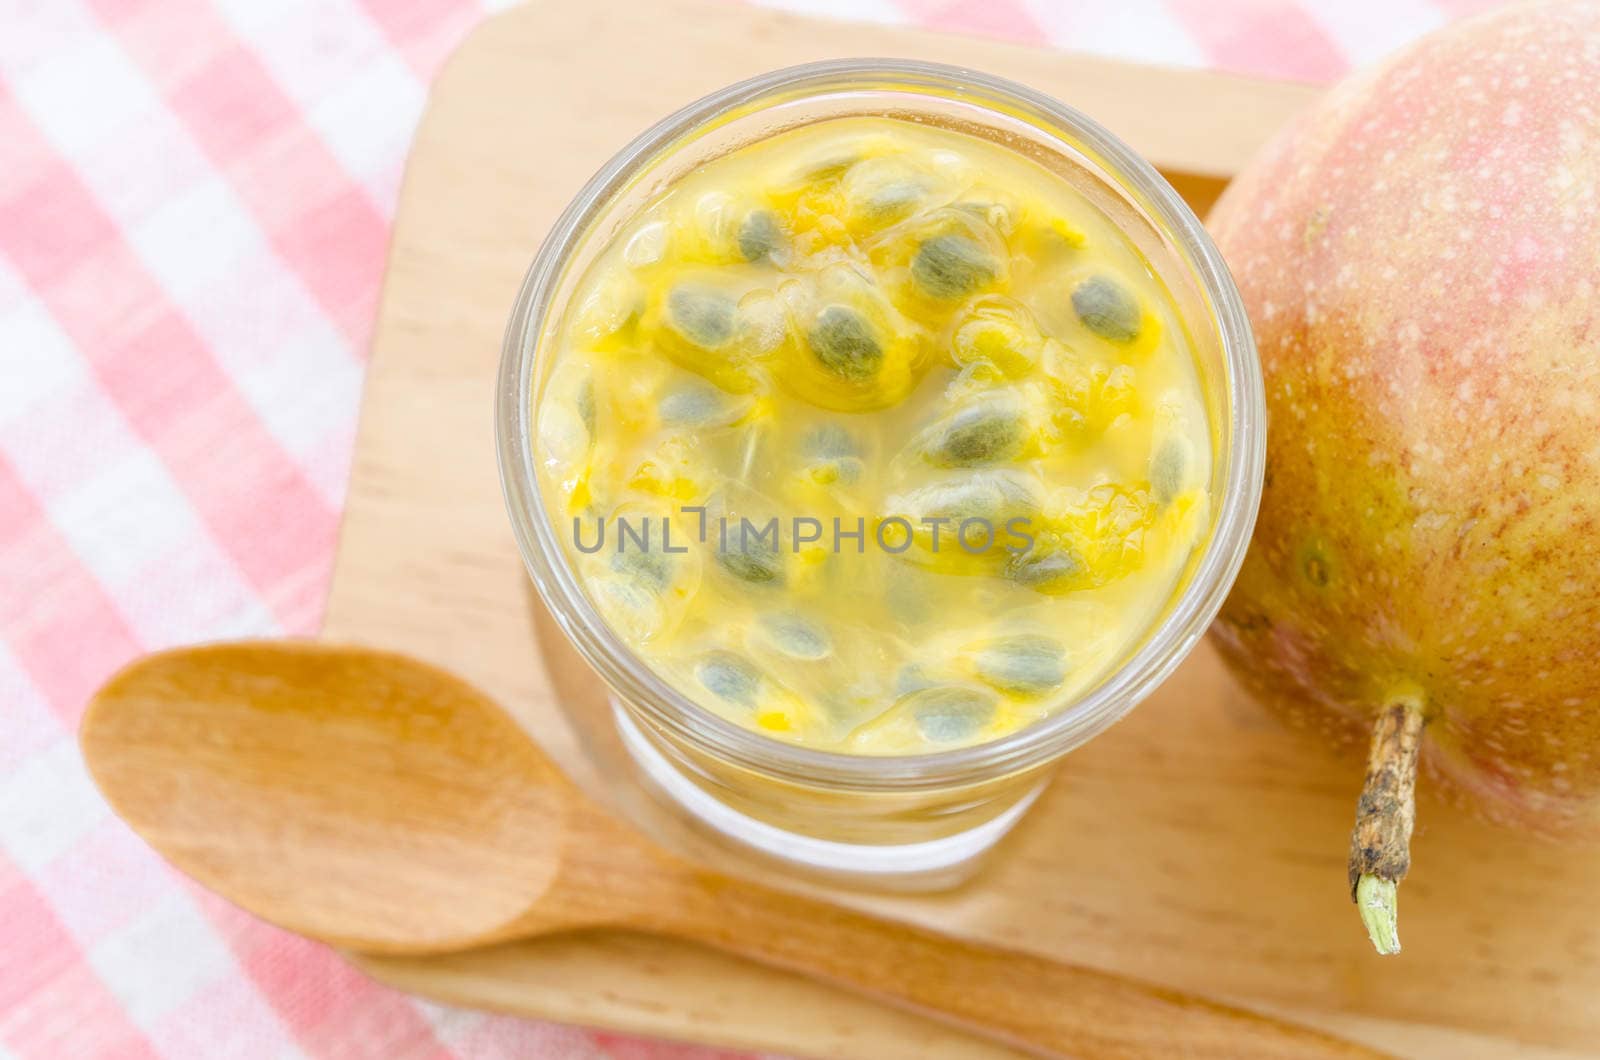 Passion fruit in glass on tablecloth.